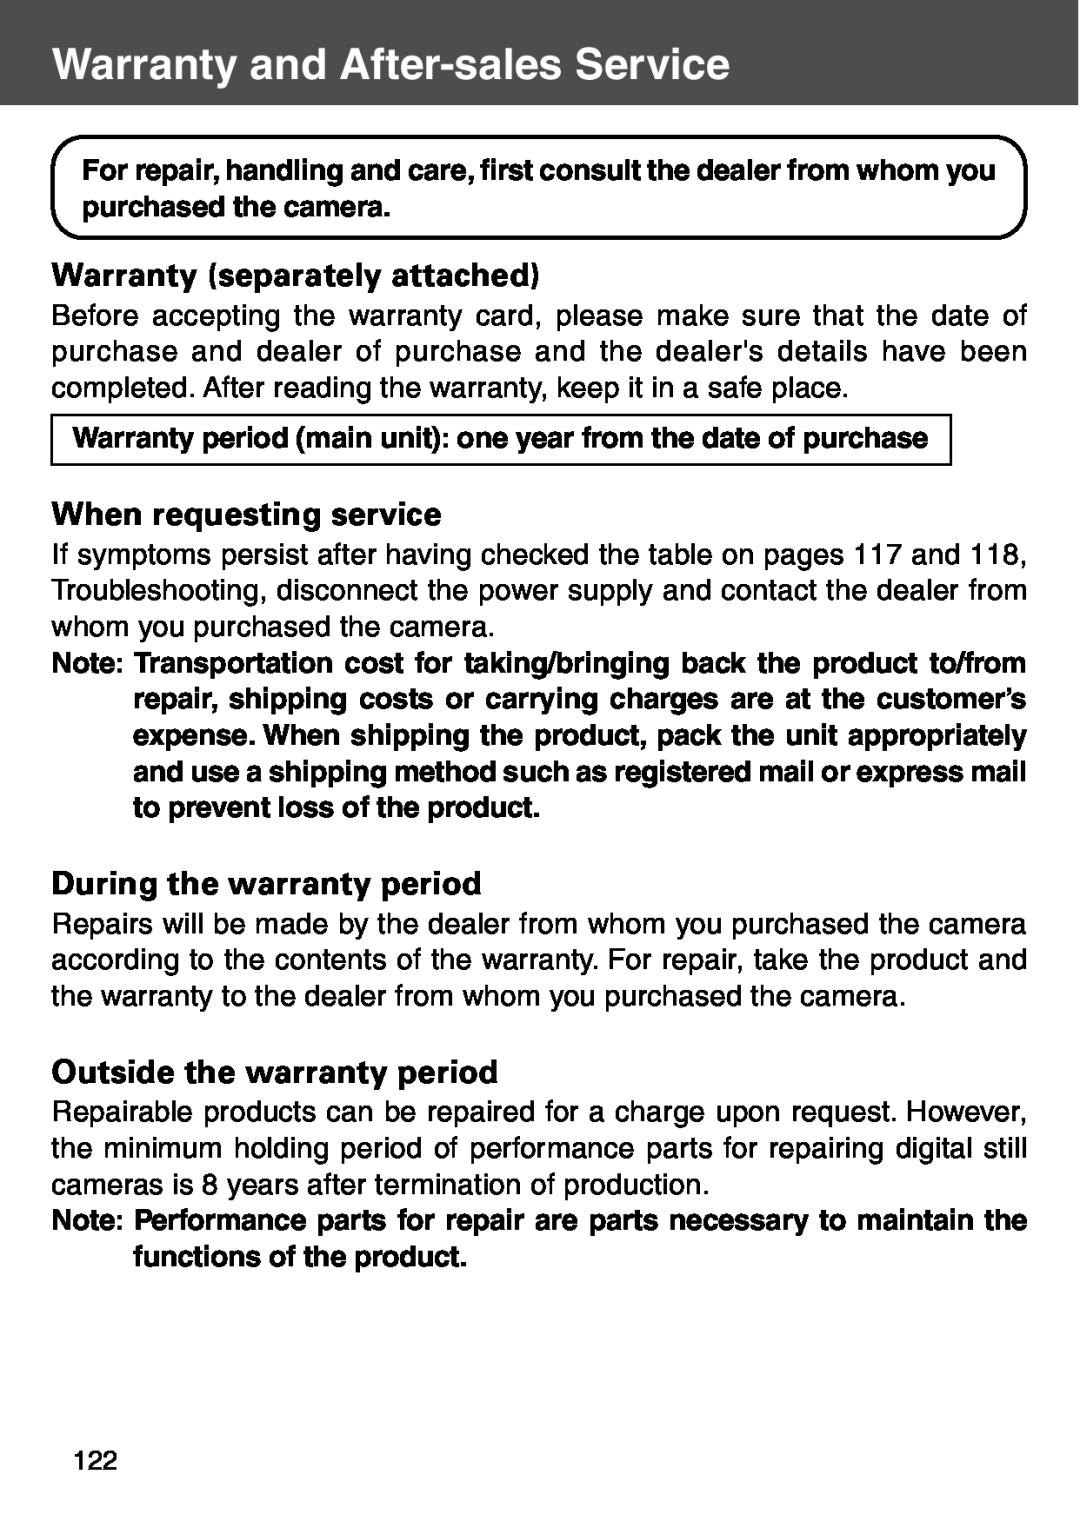 Konica Minolta KD-500Z user manual Warranty and After-sales Service, Warranty separately attached, When requesting service 